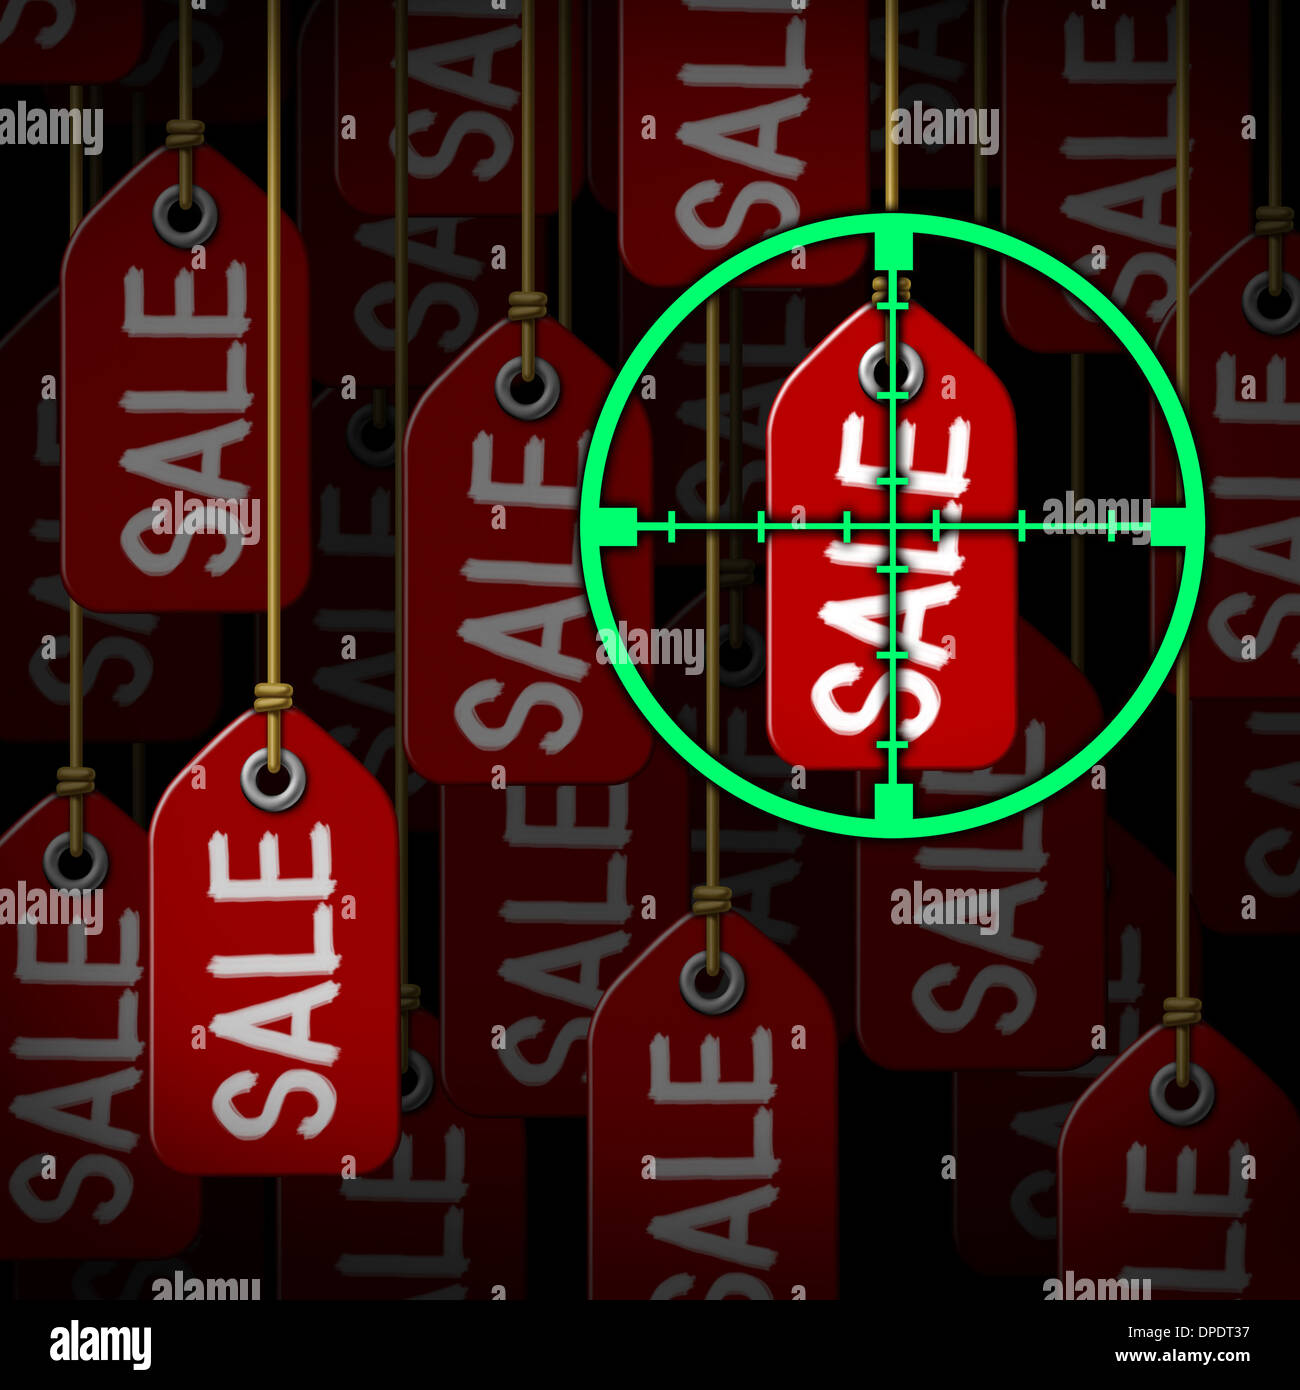 Bargain hunter and hunting for sales as a consumer concept with target crosshairs aiming at hanging price tags as a metaphor for smart shopping at stores or ecommerce business. Stock Photo